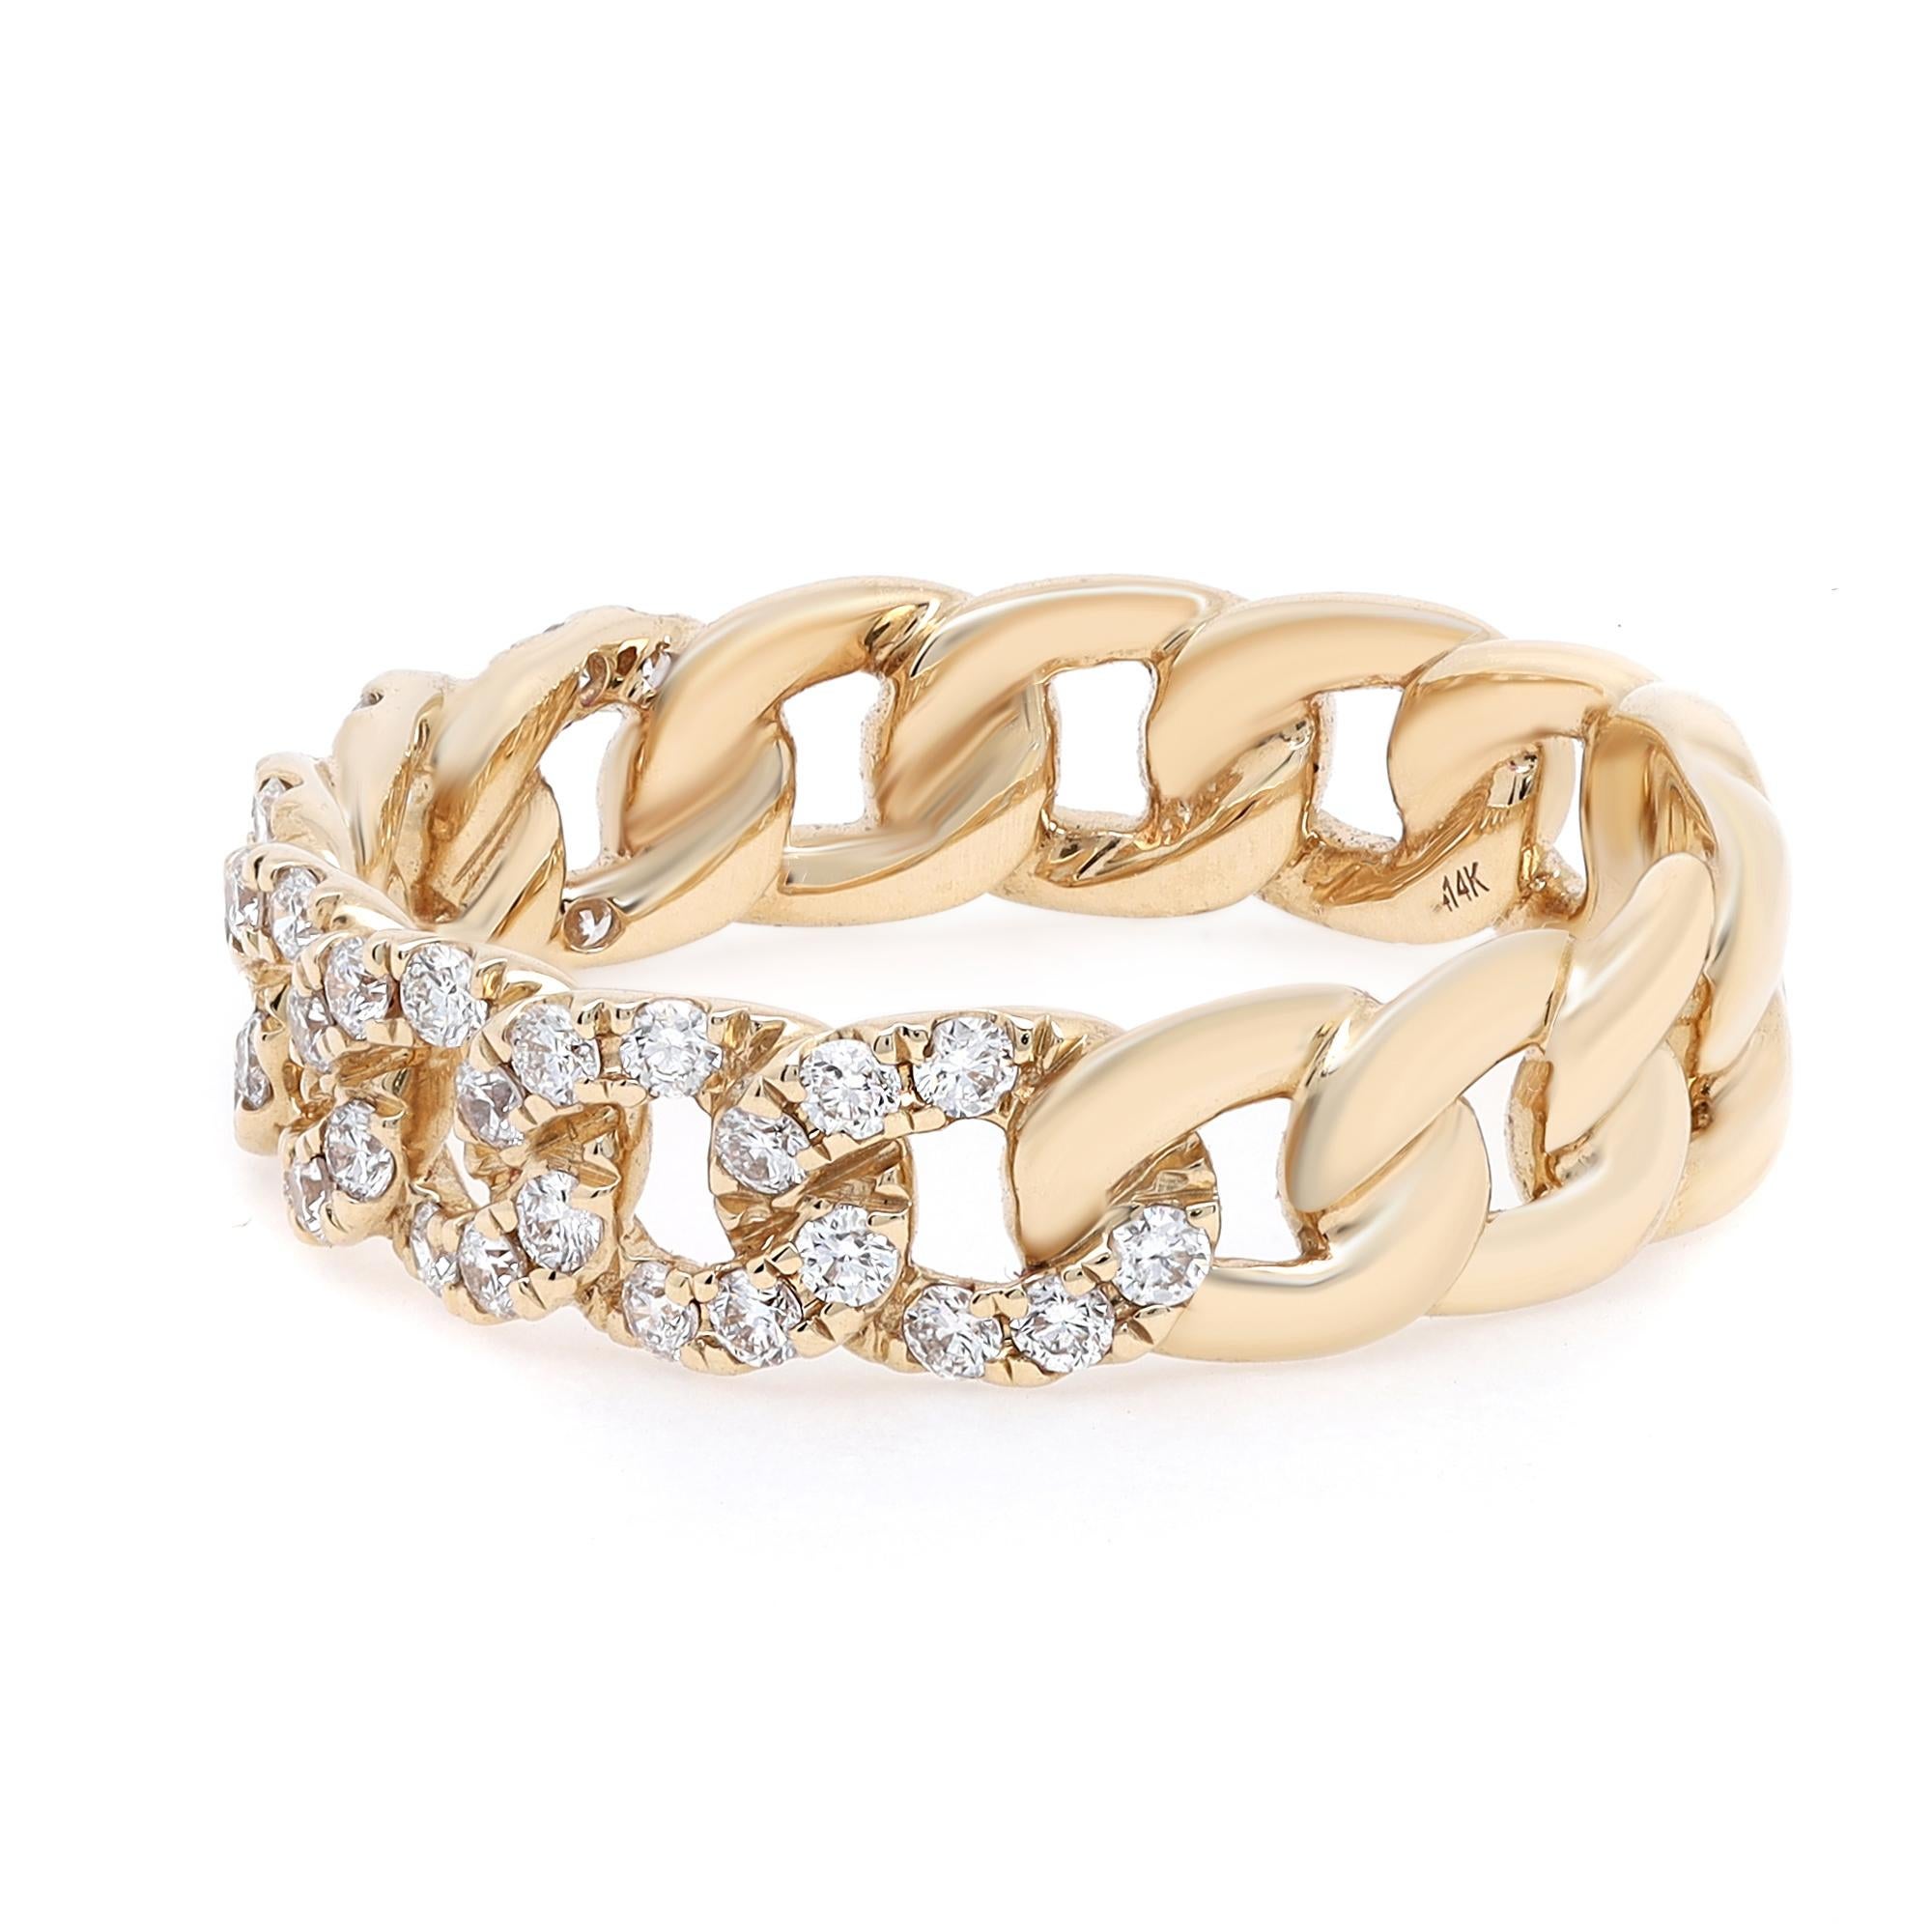 Trendy and chic, pave chain link diamond ring. Crafted in bright 14k yellow gold, pave-set round brilliant-cut diamonds in chain link design portrays a timeless, eye catching style. It's stackable and easy to mix and match. Diamond weight: 0.41.